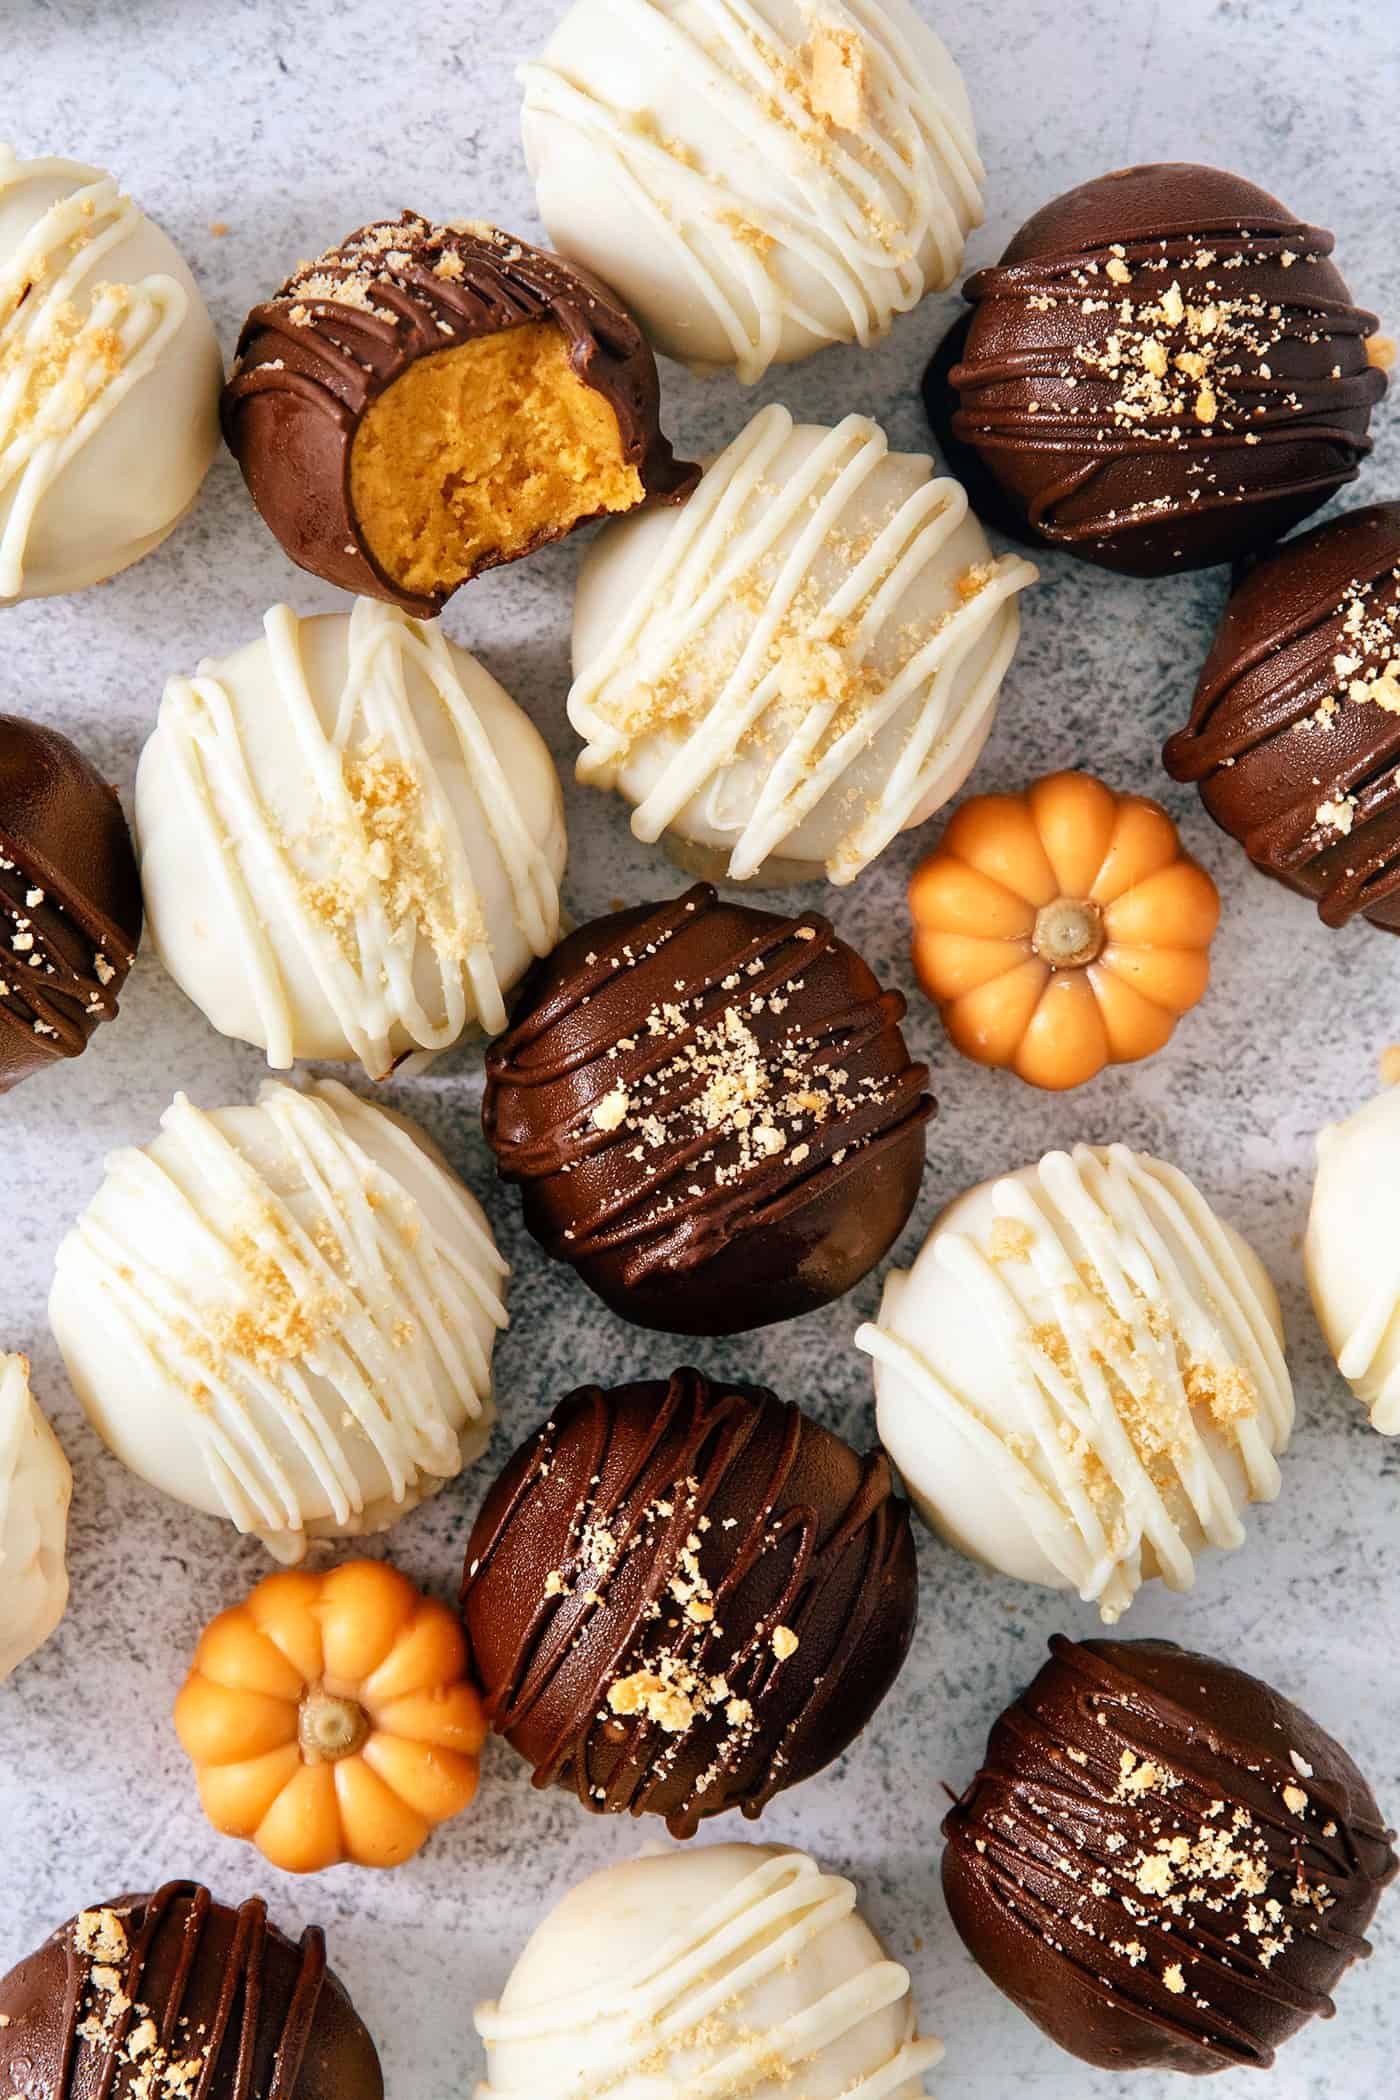 Pumpkin pie truffles and mini pumpkins are shown on a white background.